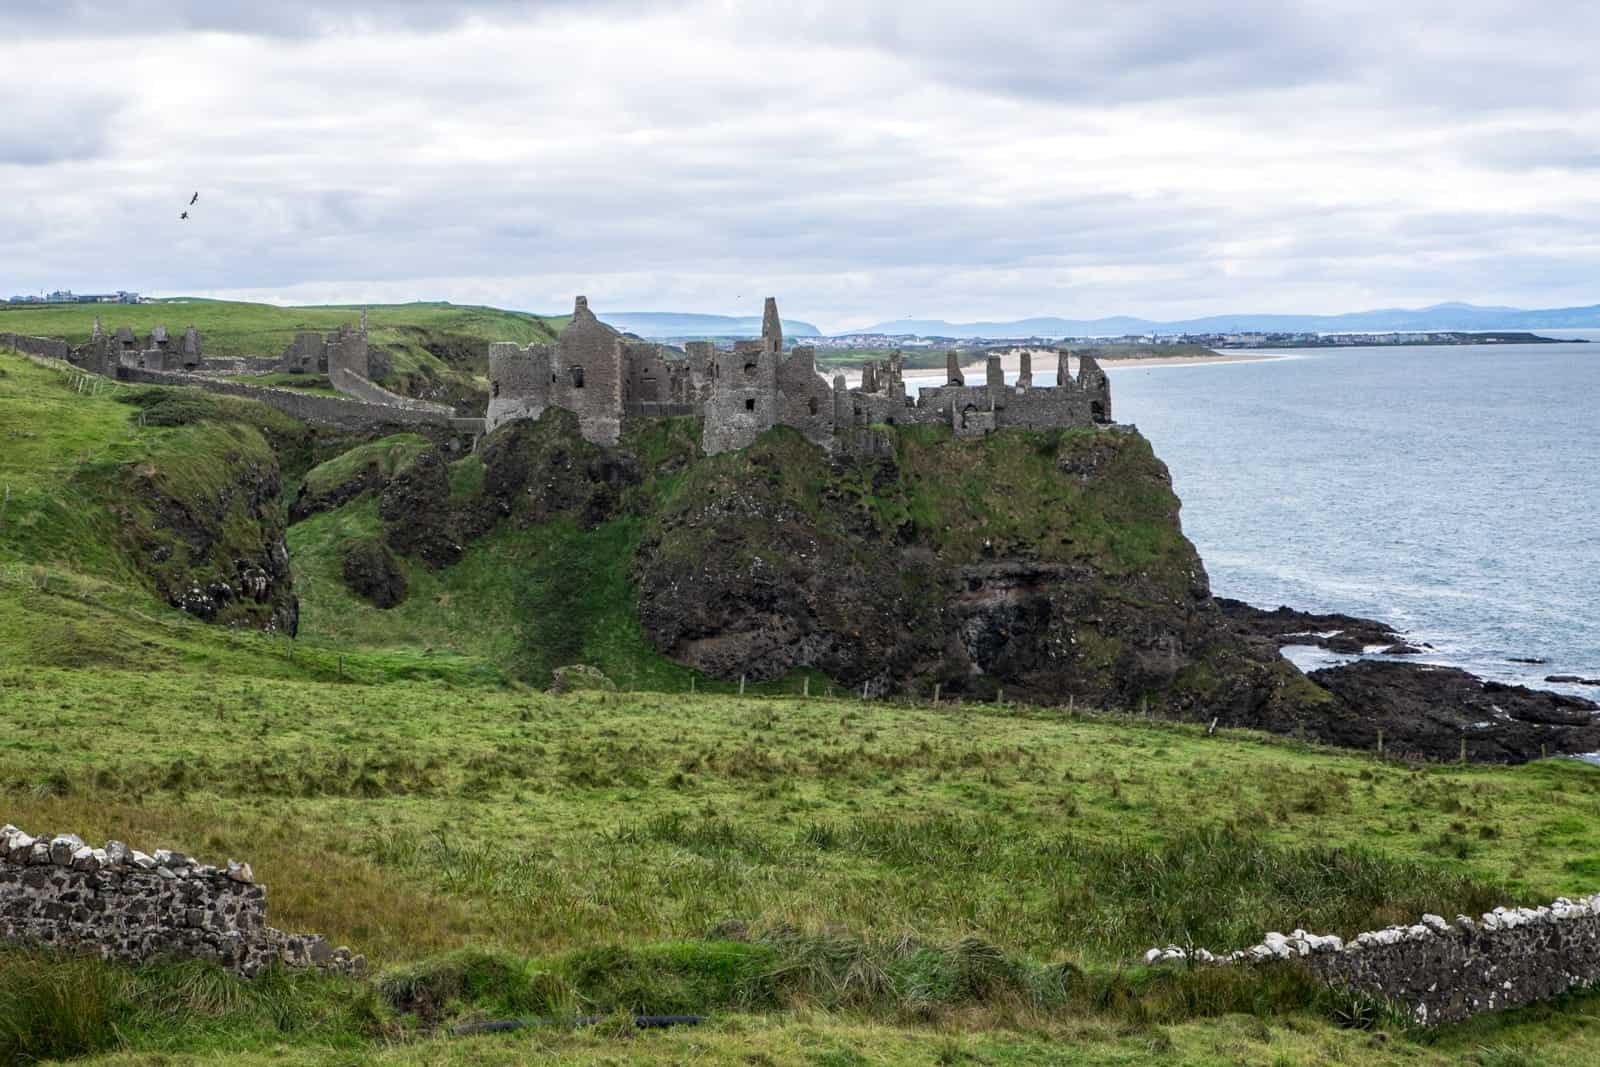 Ruins of Dunluce castle in Northern Ireland Coastal Causeway route